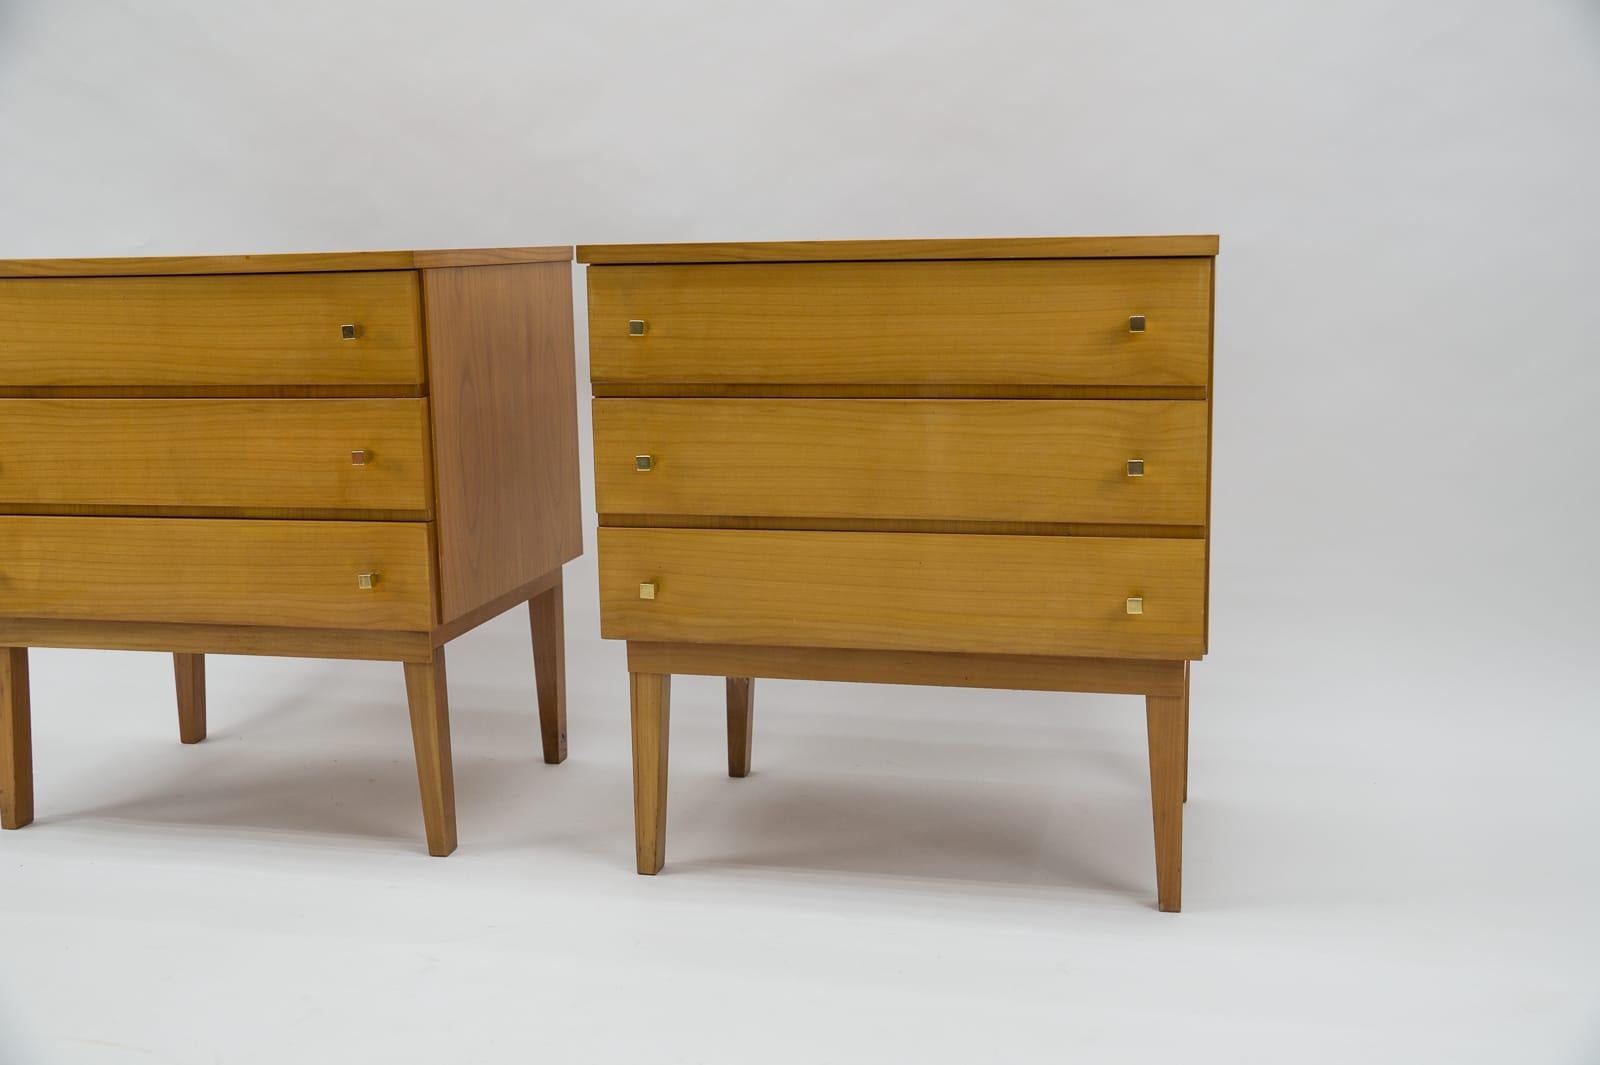  Mid-Century Modern Brass and Wood Nightstands, 1950s, Set of 2 For Sale 1